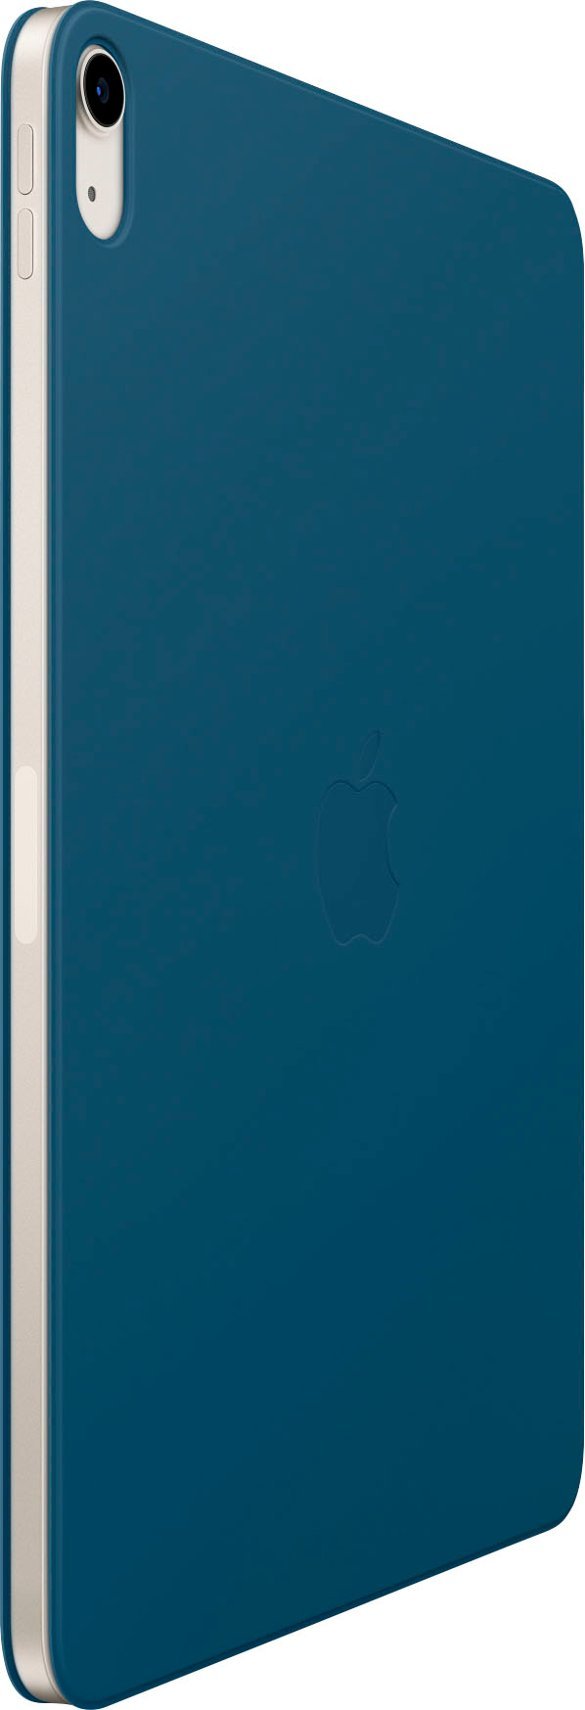 Apple Smart Folio Case for iPad Air 10.9&quot; (5th and 4th Generation) - Marine Blue (Certified Refurbished)